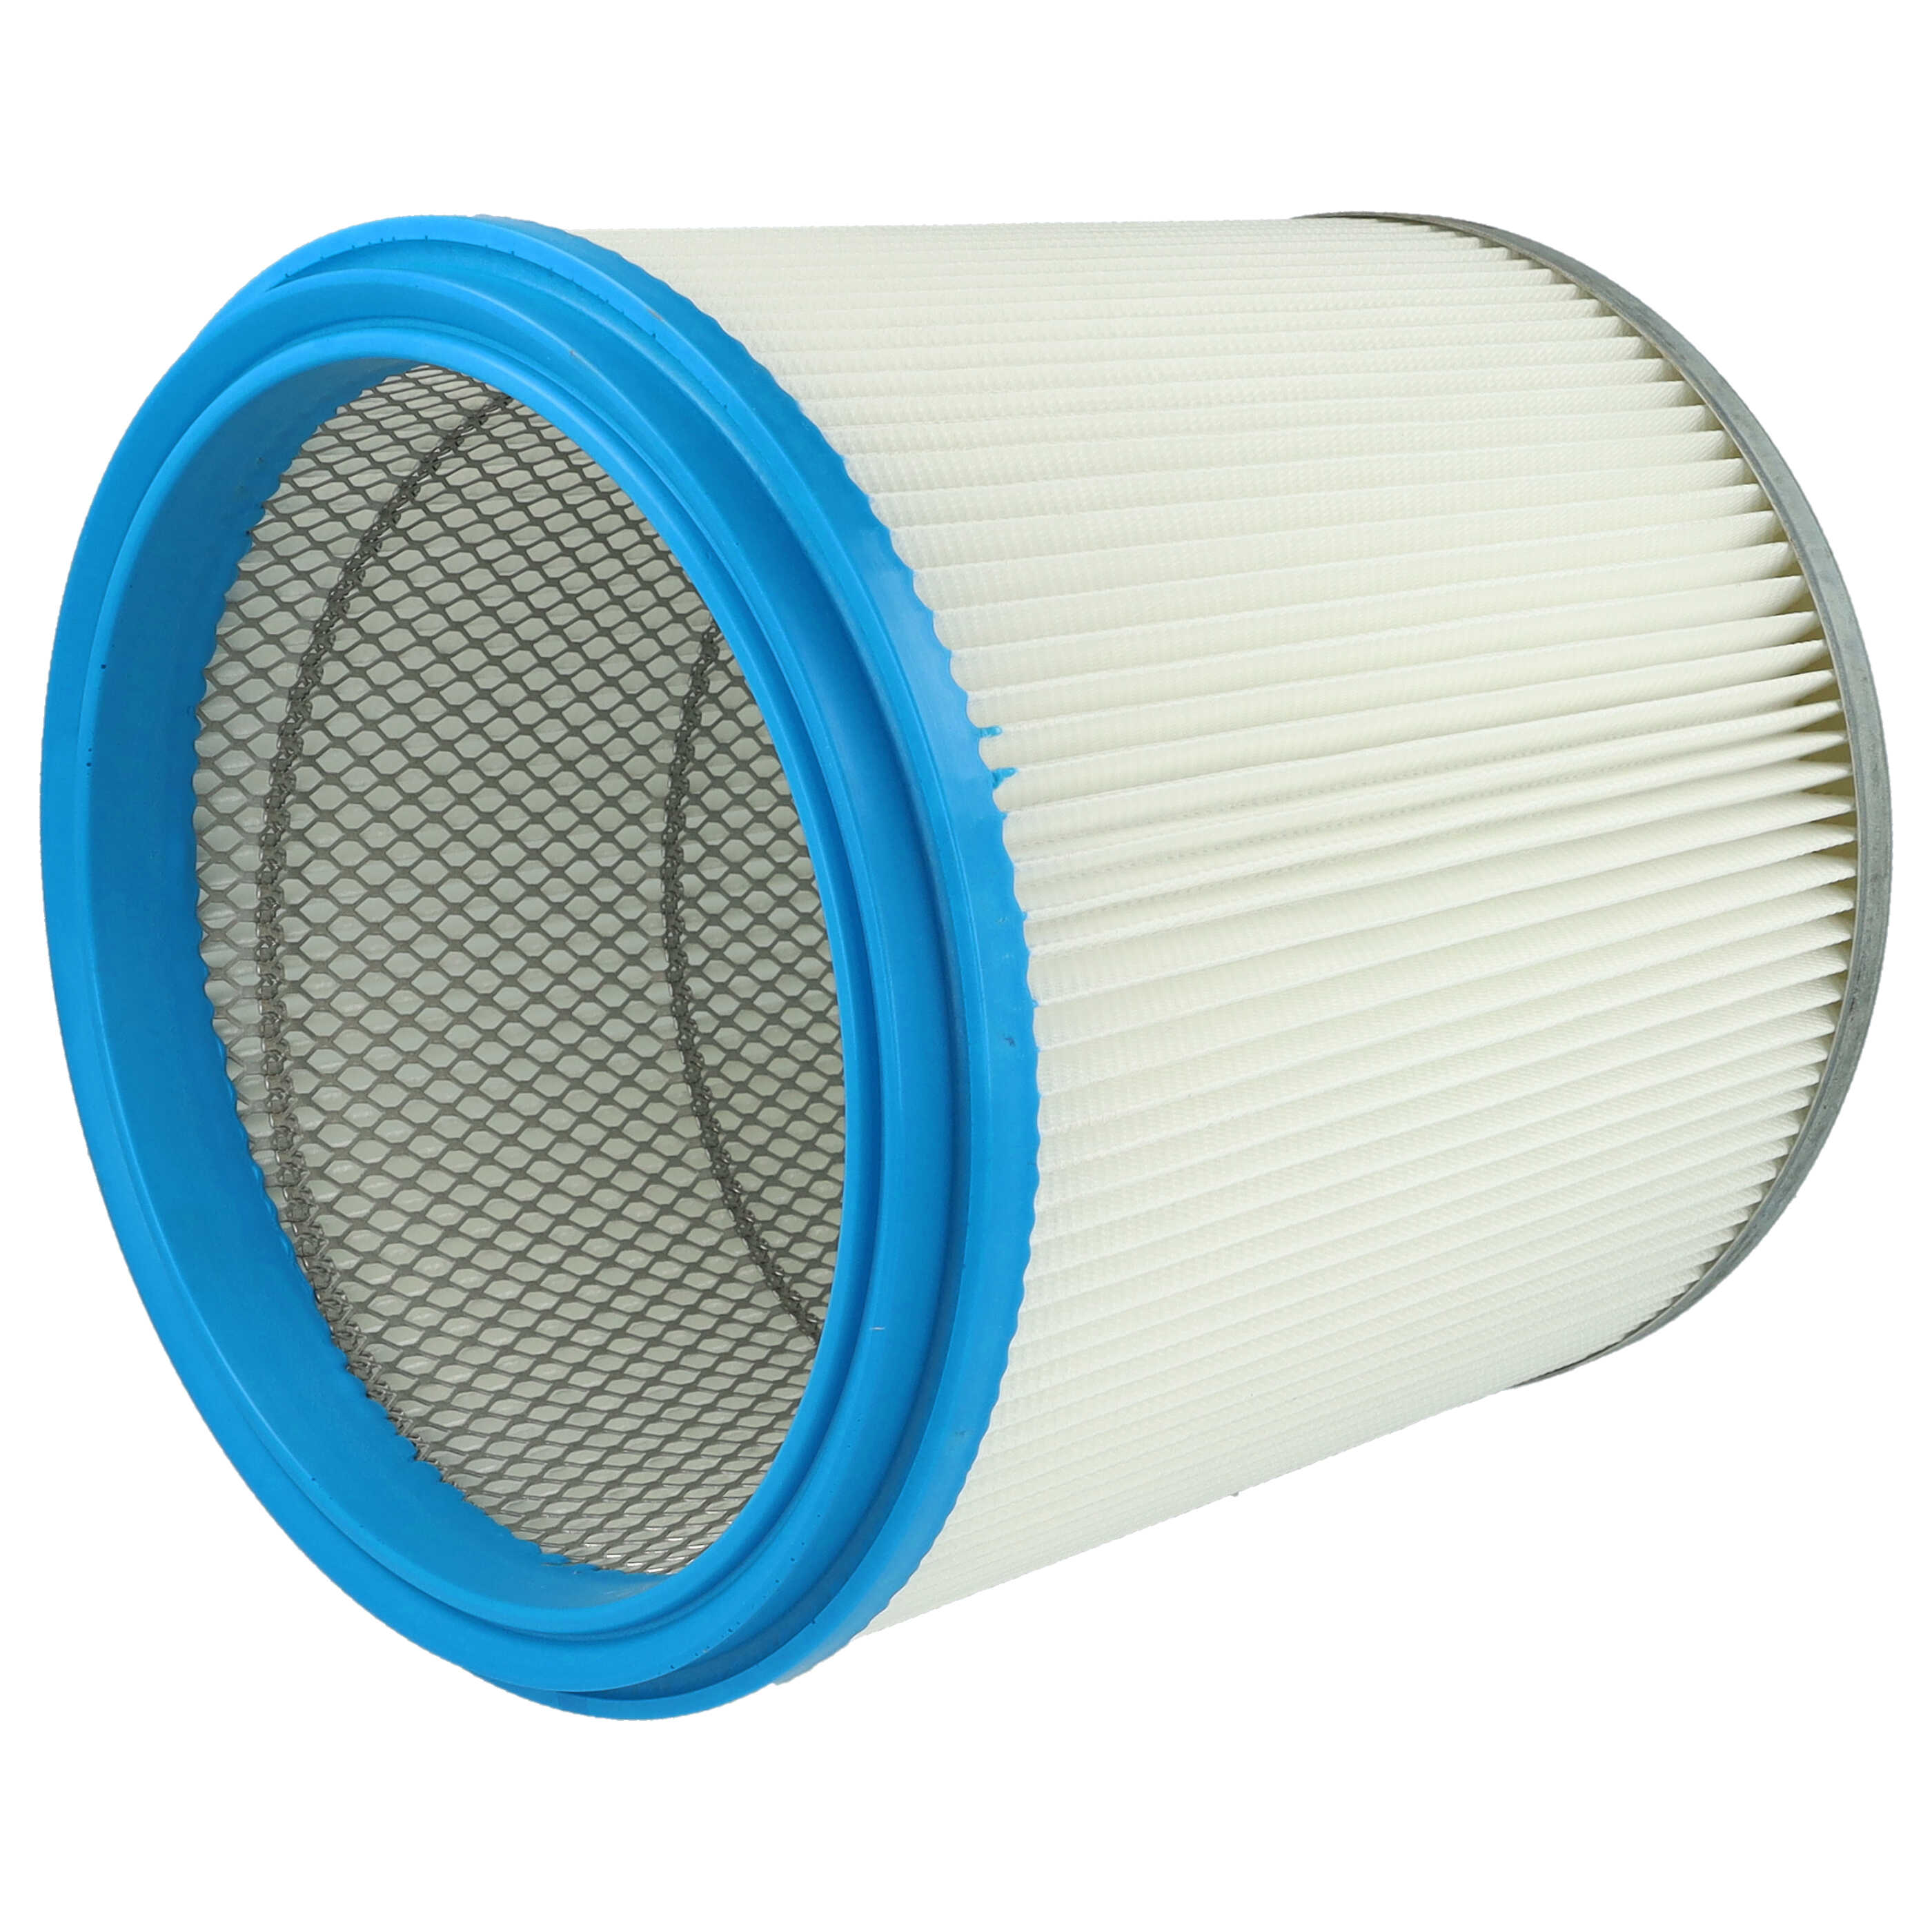 1x cartridge filter replaces Bosch 2607432008 for BoschVacuum Cleaner, white / silver / blue